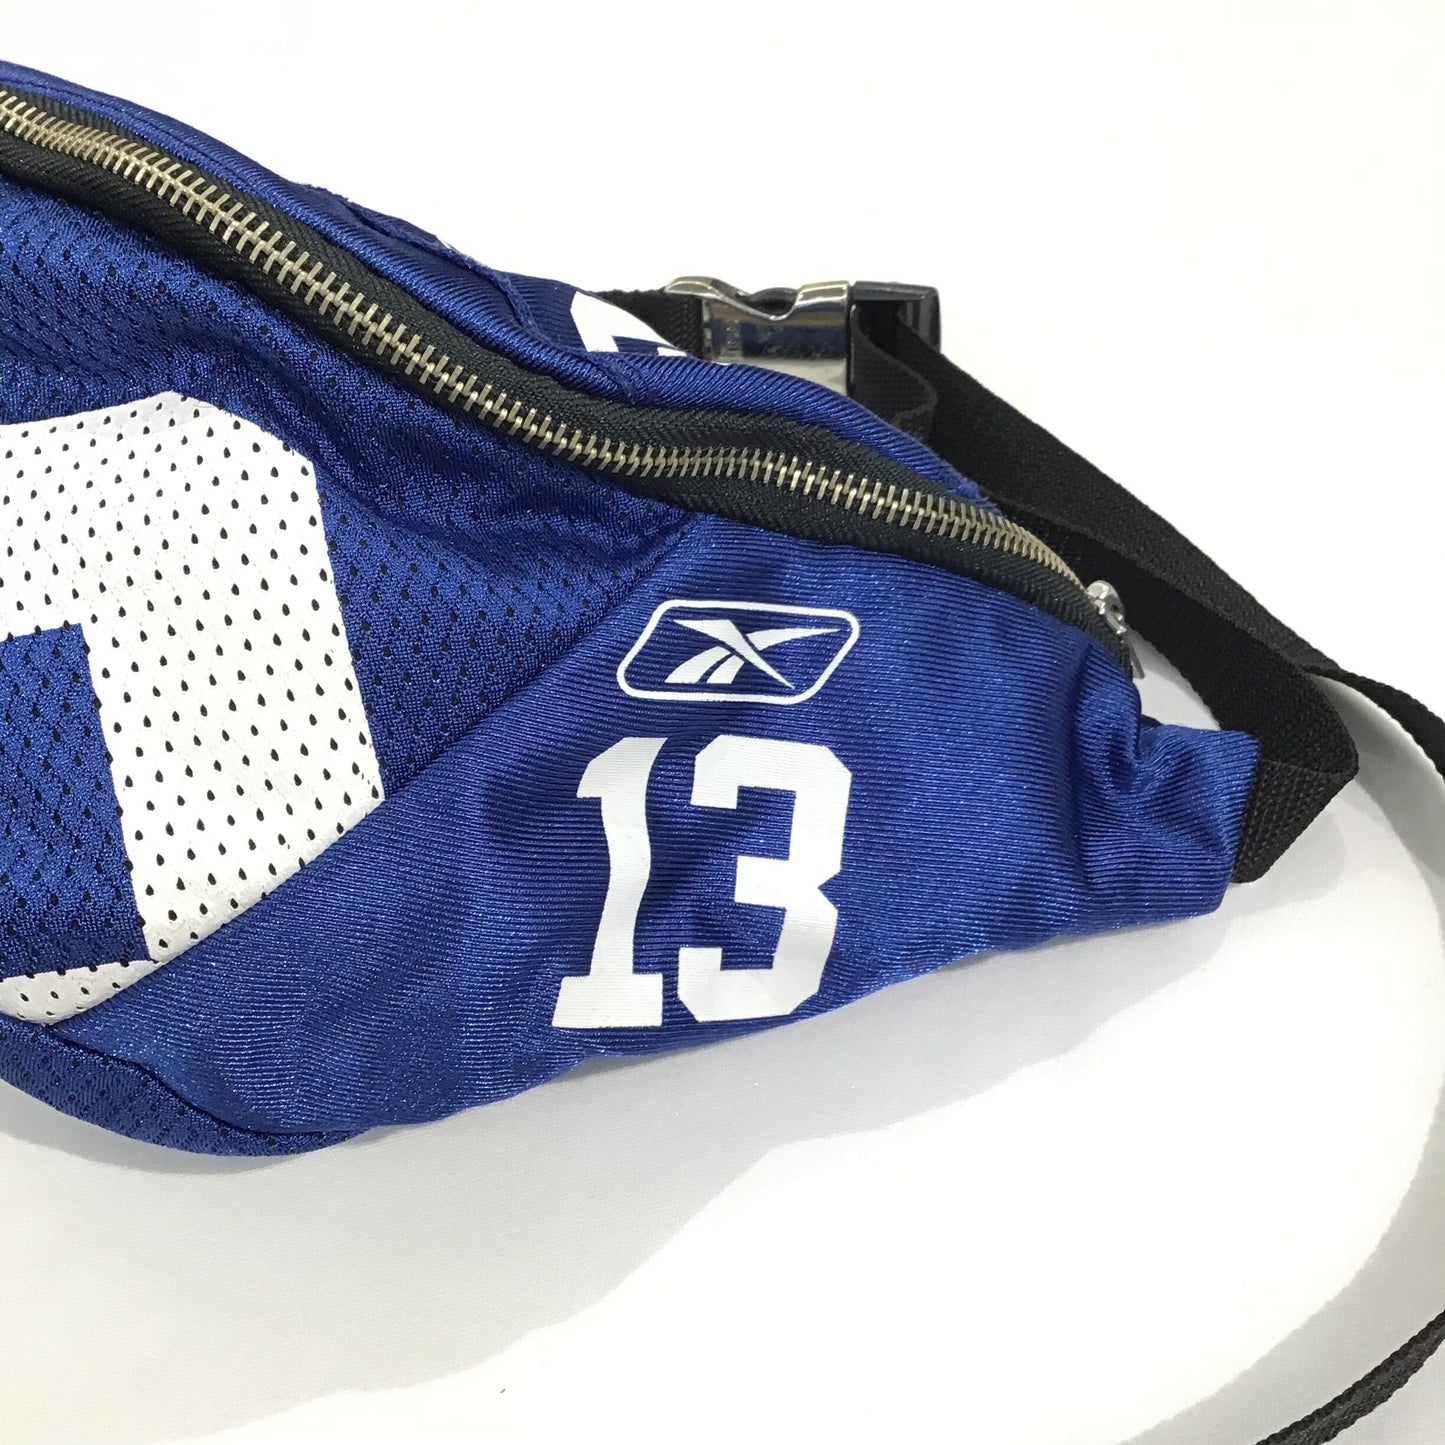 NFL Team Dallas Cowboys "VANDERJAGT" Amekaji Japanese Vintage Handmade Custom One and Only One Cote Mer Upcycle Sustainable Upscale Street Fashion Embroidered Remake Deconstructed Shirts Waist Bag